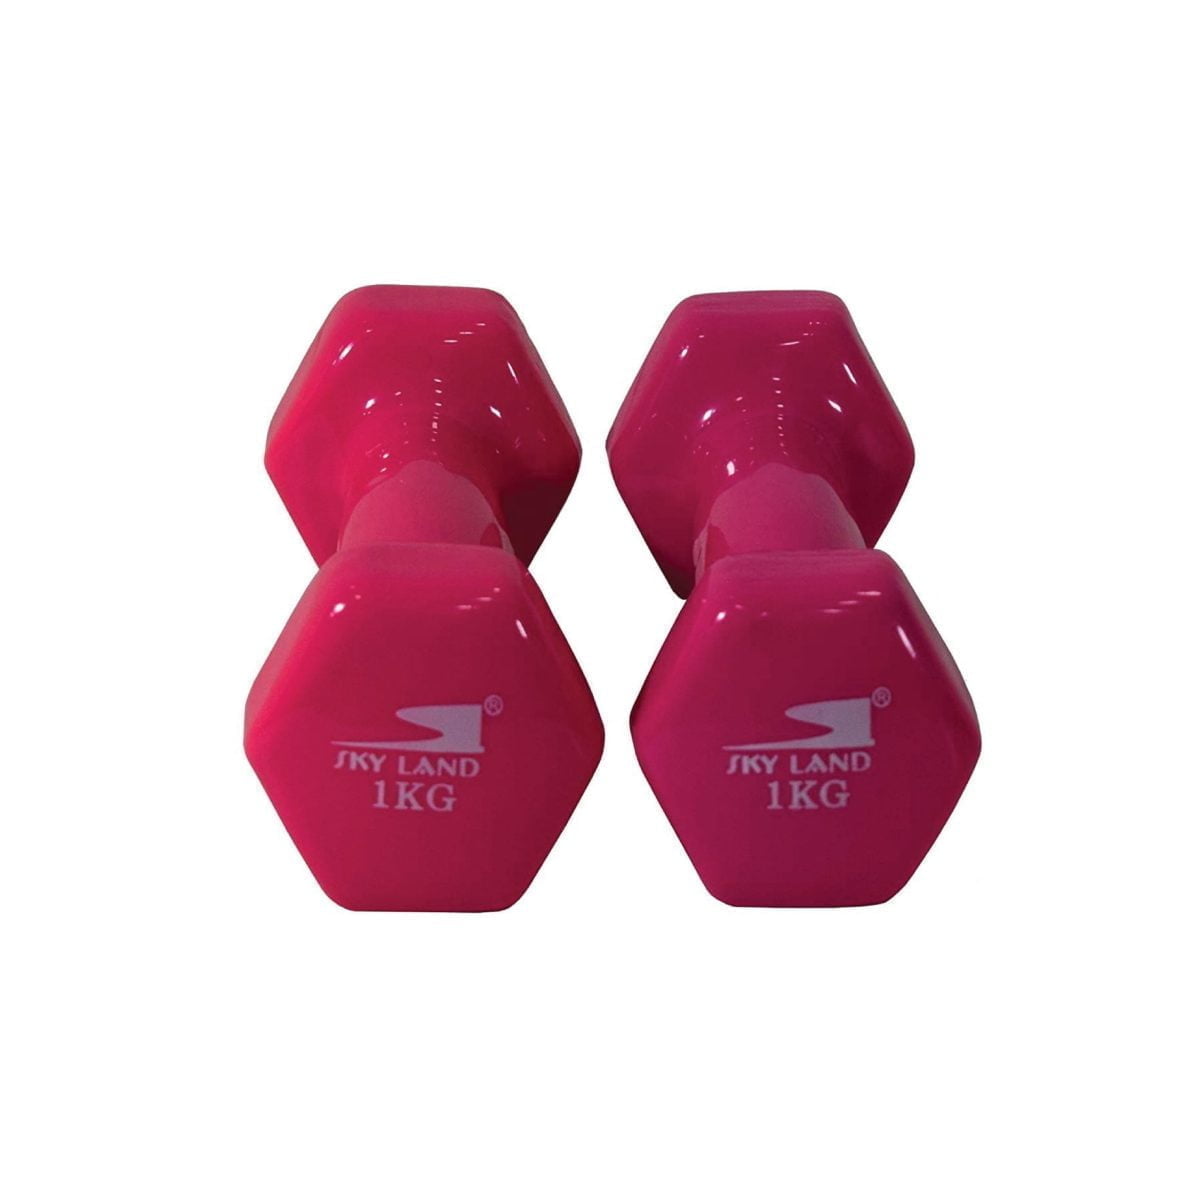 Axc 01 Scaled &Lt;H1&Gt;Deluxe Vinyl Dumbbell 2-Piece 1Kg&Lt;/H1&Gt; Deluxe Vinyl Dumbbell Constructed Of Heavy-Duty Solid Cast Iron Core To Add More Durability And Stability. Will Not Break Or Bend After Repeated Use. These Durable Hand Weights Are The Perfect Addition To Aerobics And Step Workouts, As Well As Any Standard Strength Training With Weights For Added Intensity And Resistance. Skyland Deluxe Vinyl Dumbbells -Em-9219R-3 Provides A Comfortable Feel To Handle And A Snug Grip For Sweaty Hands. Our Dumbbells Is A Great Assistant In A Wide Range Of Training And Fitness Exercises. Tone All Over Muscles, Lose More Weight And Enhance Your Body Strength By Using It To Perform Curls, Triceps Extension And Bench Press Or Shoulder Press Or Simply Use It When You Walk Or Do Aerobics Exercises To Add More Weight And Thus Improve Your Core Strength. Deluxe Vinyl Dumbbell 2-Piece 1Kg Deluxe Vinyl Dumbbell 2-Piece 1Kg